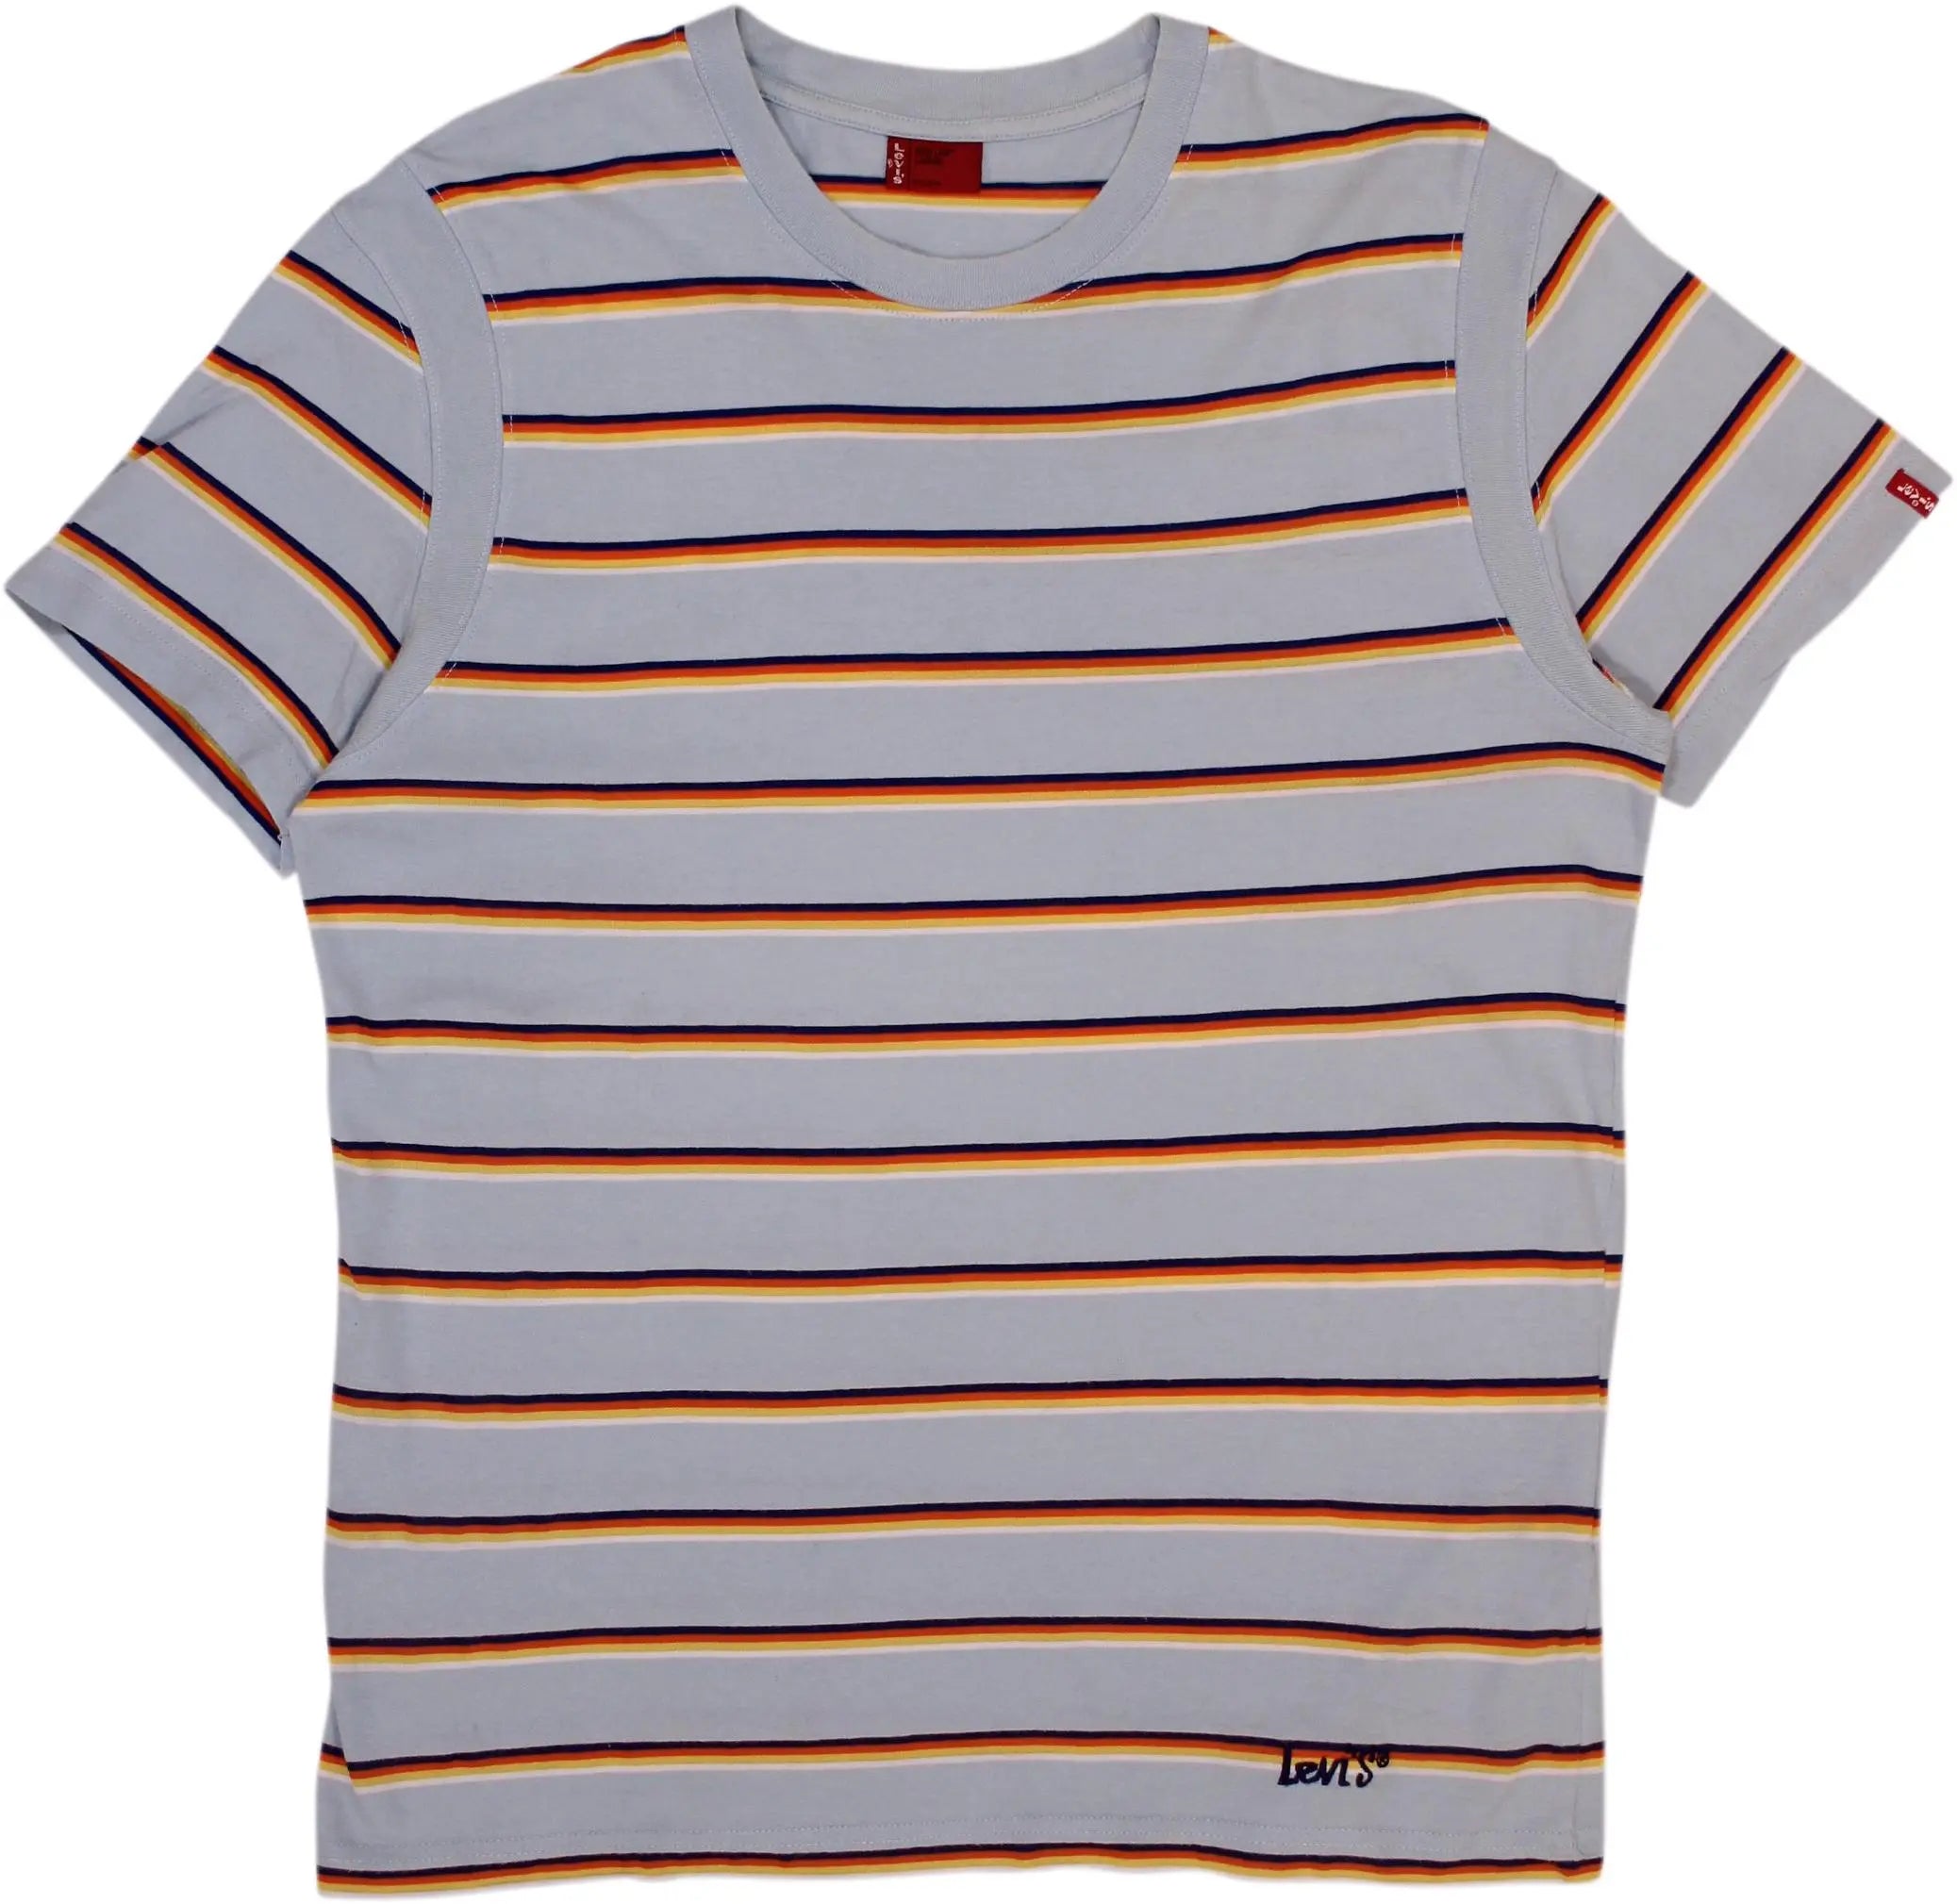 Levi's - Striped T-shirt by Levi's- ThriftTale.com - Vintage and second handclothing